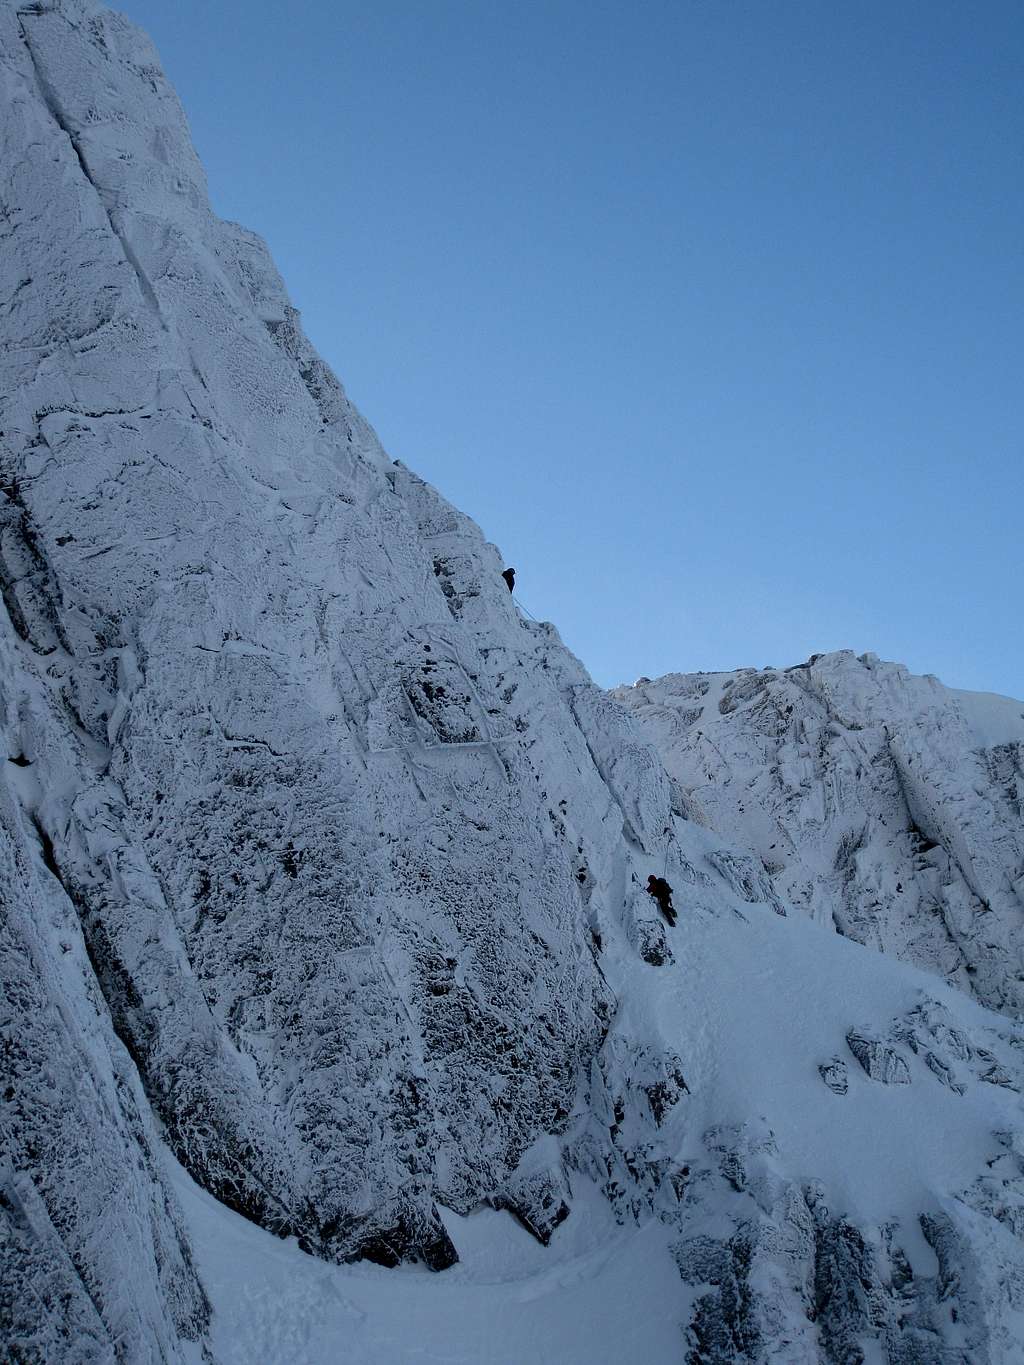 Climbers on the upper pitches of Number 3 Gully Buttress on Ben Nevis